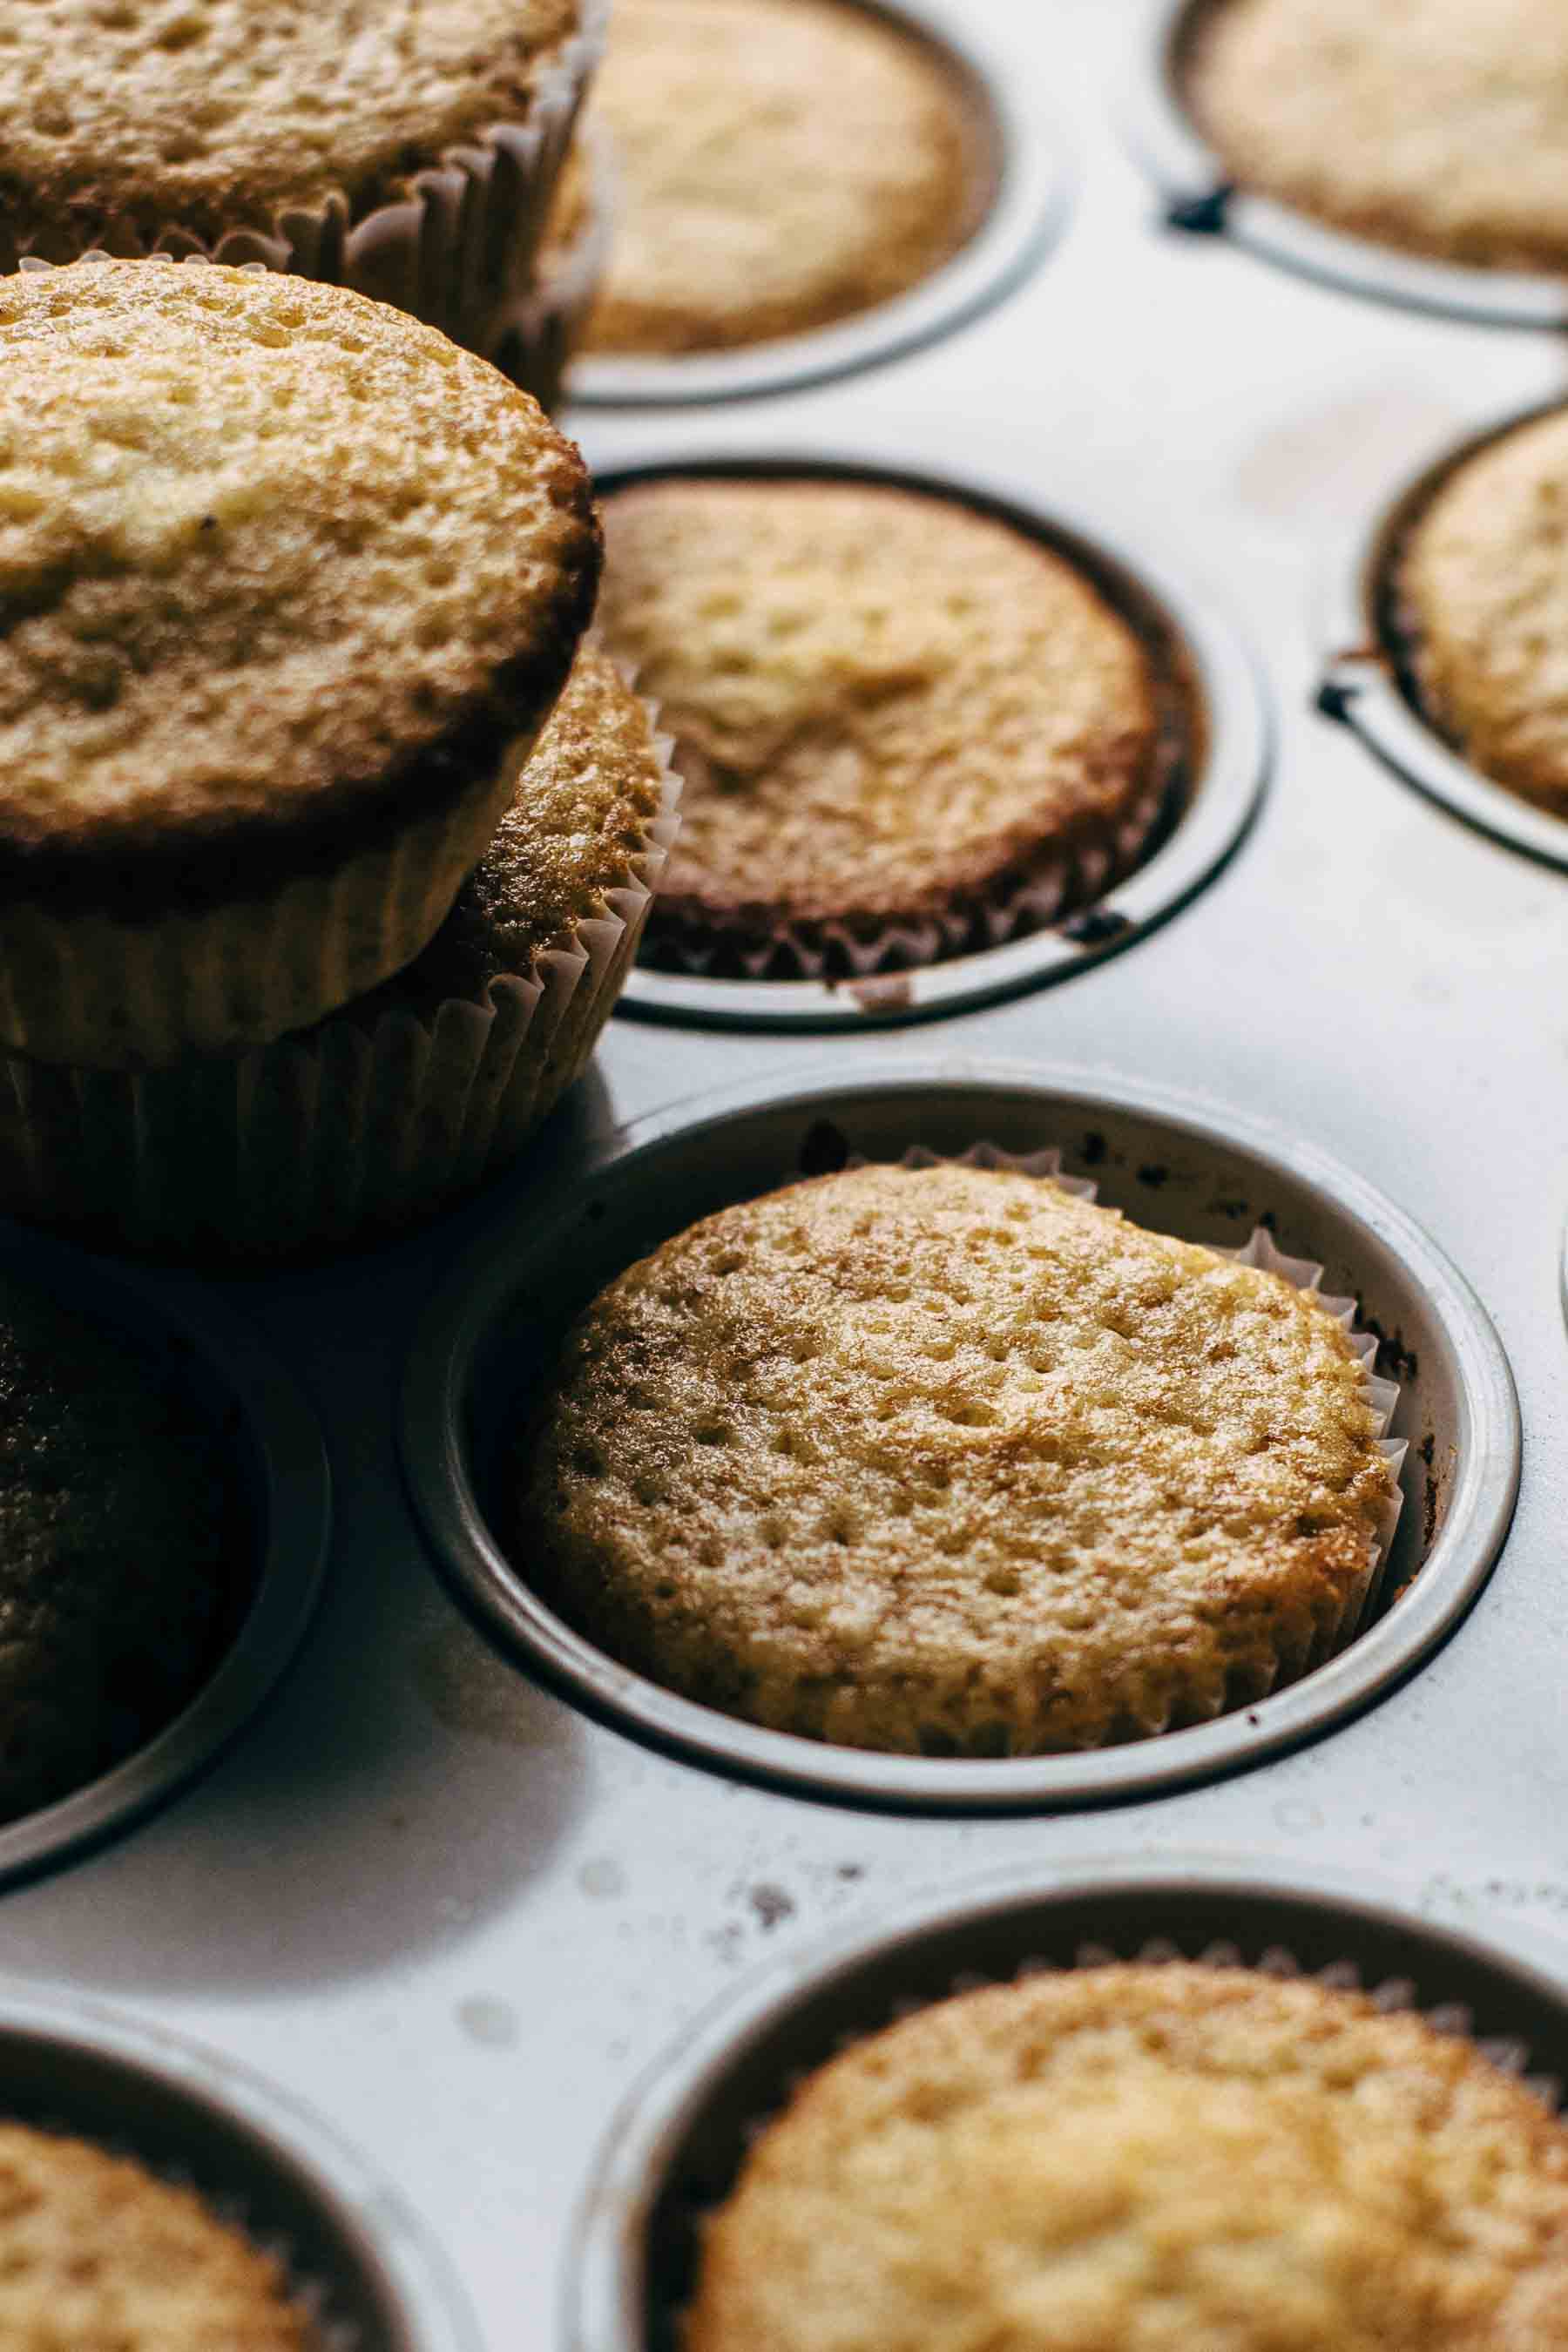 A cupcake pan full with baked cupcakes